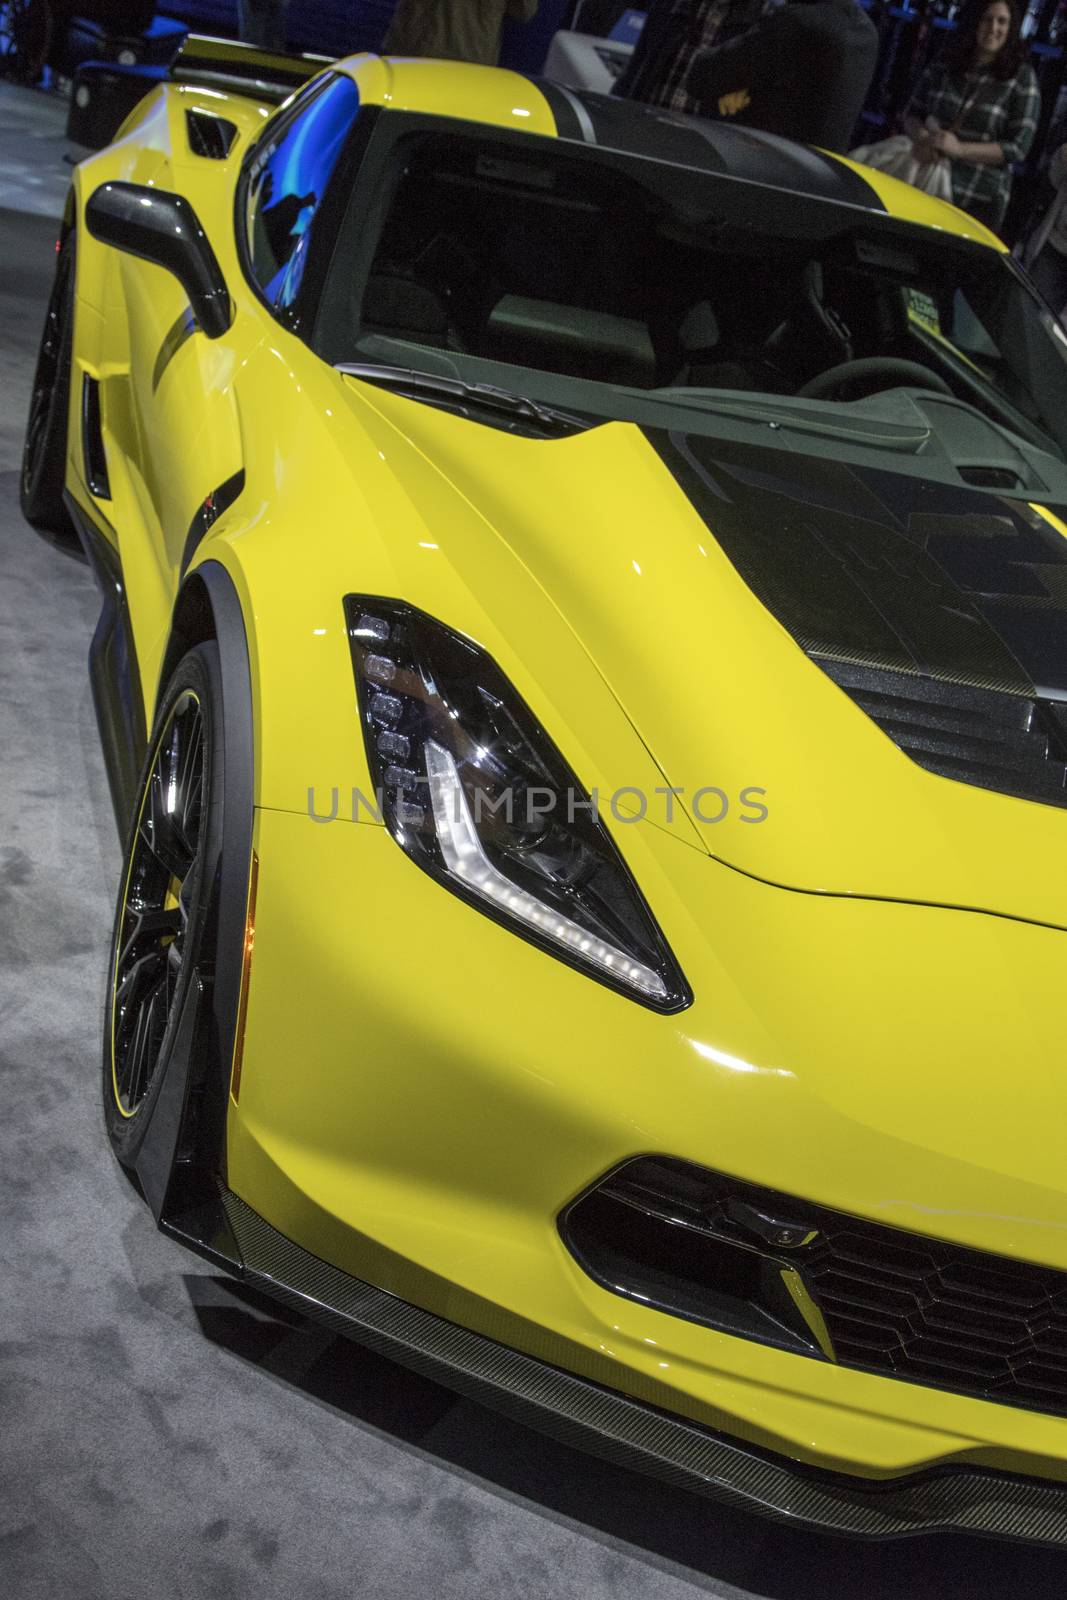 DETROIT - JANUARY 17 :The 2017 Chevrolet Corvette at The North A by snokid